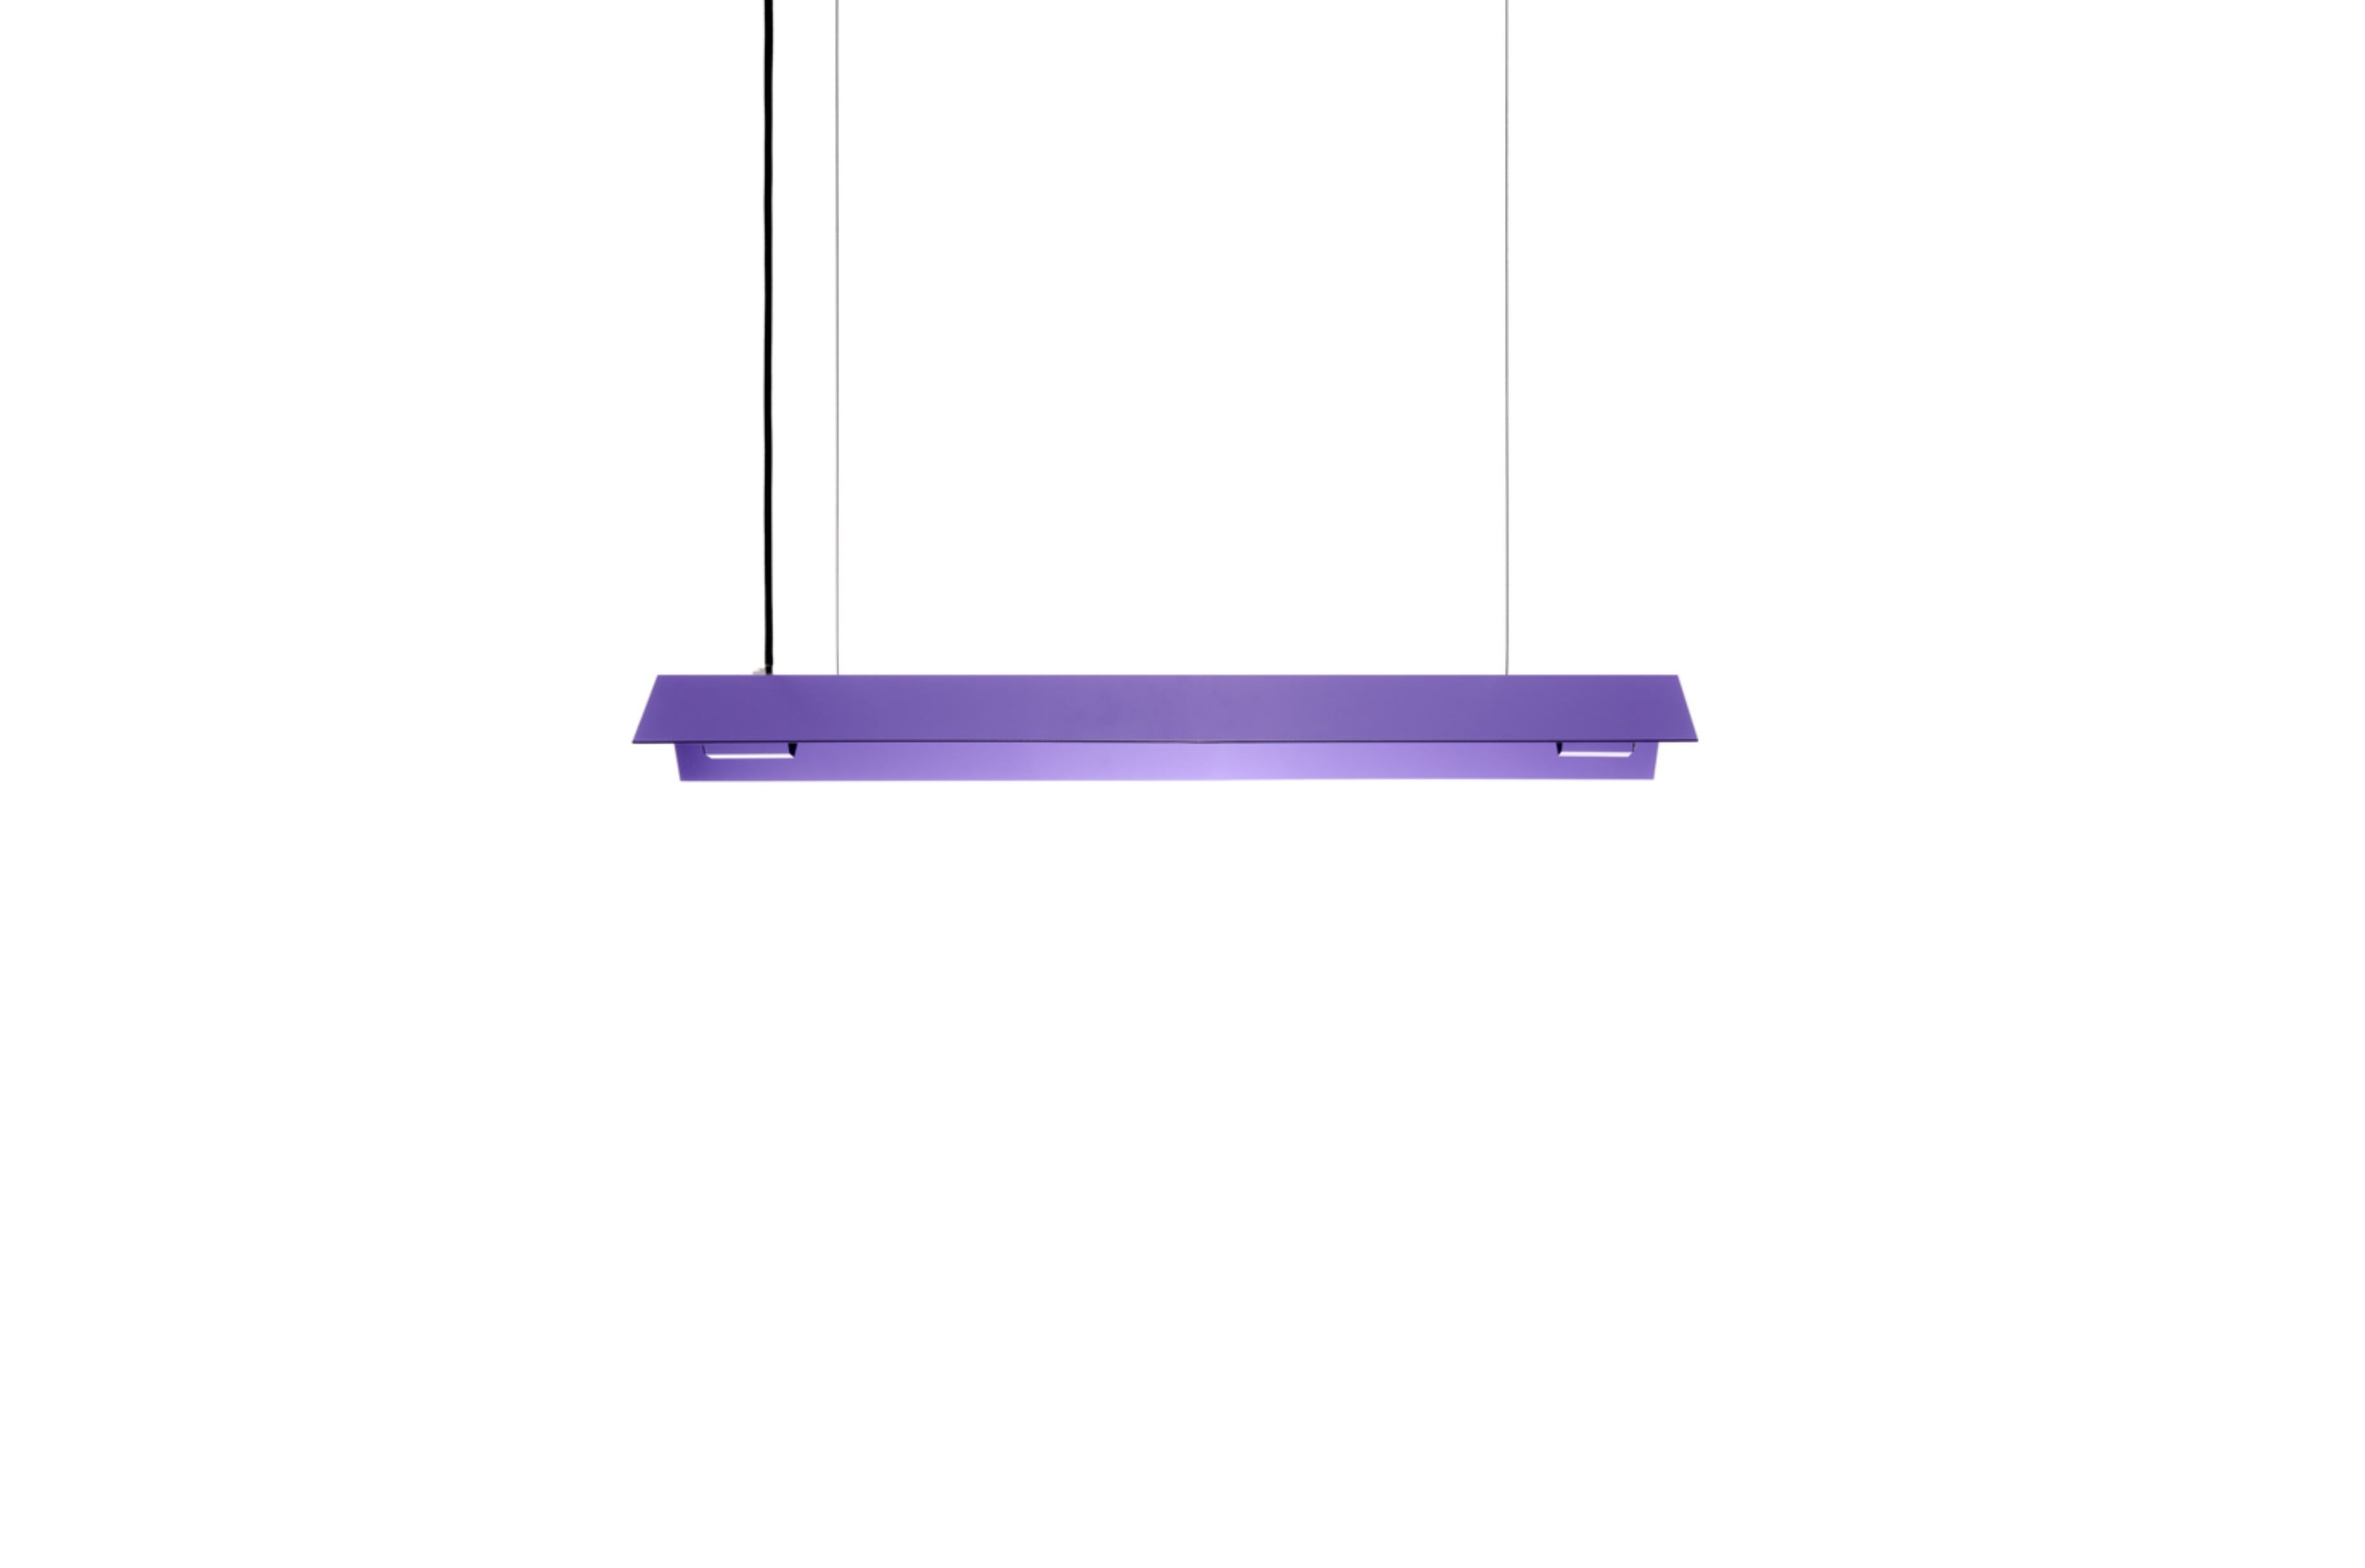 Small Misalliance ral lavender suspended Light by Lexavala
Dimensions: D 16 x W 70 x H 8 cm
Materials: powder coated aluminium.

There are two lenghts of socket covers, extending over the LED. Two short are to be found in Suspended and Surface,